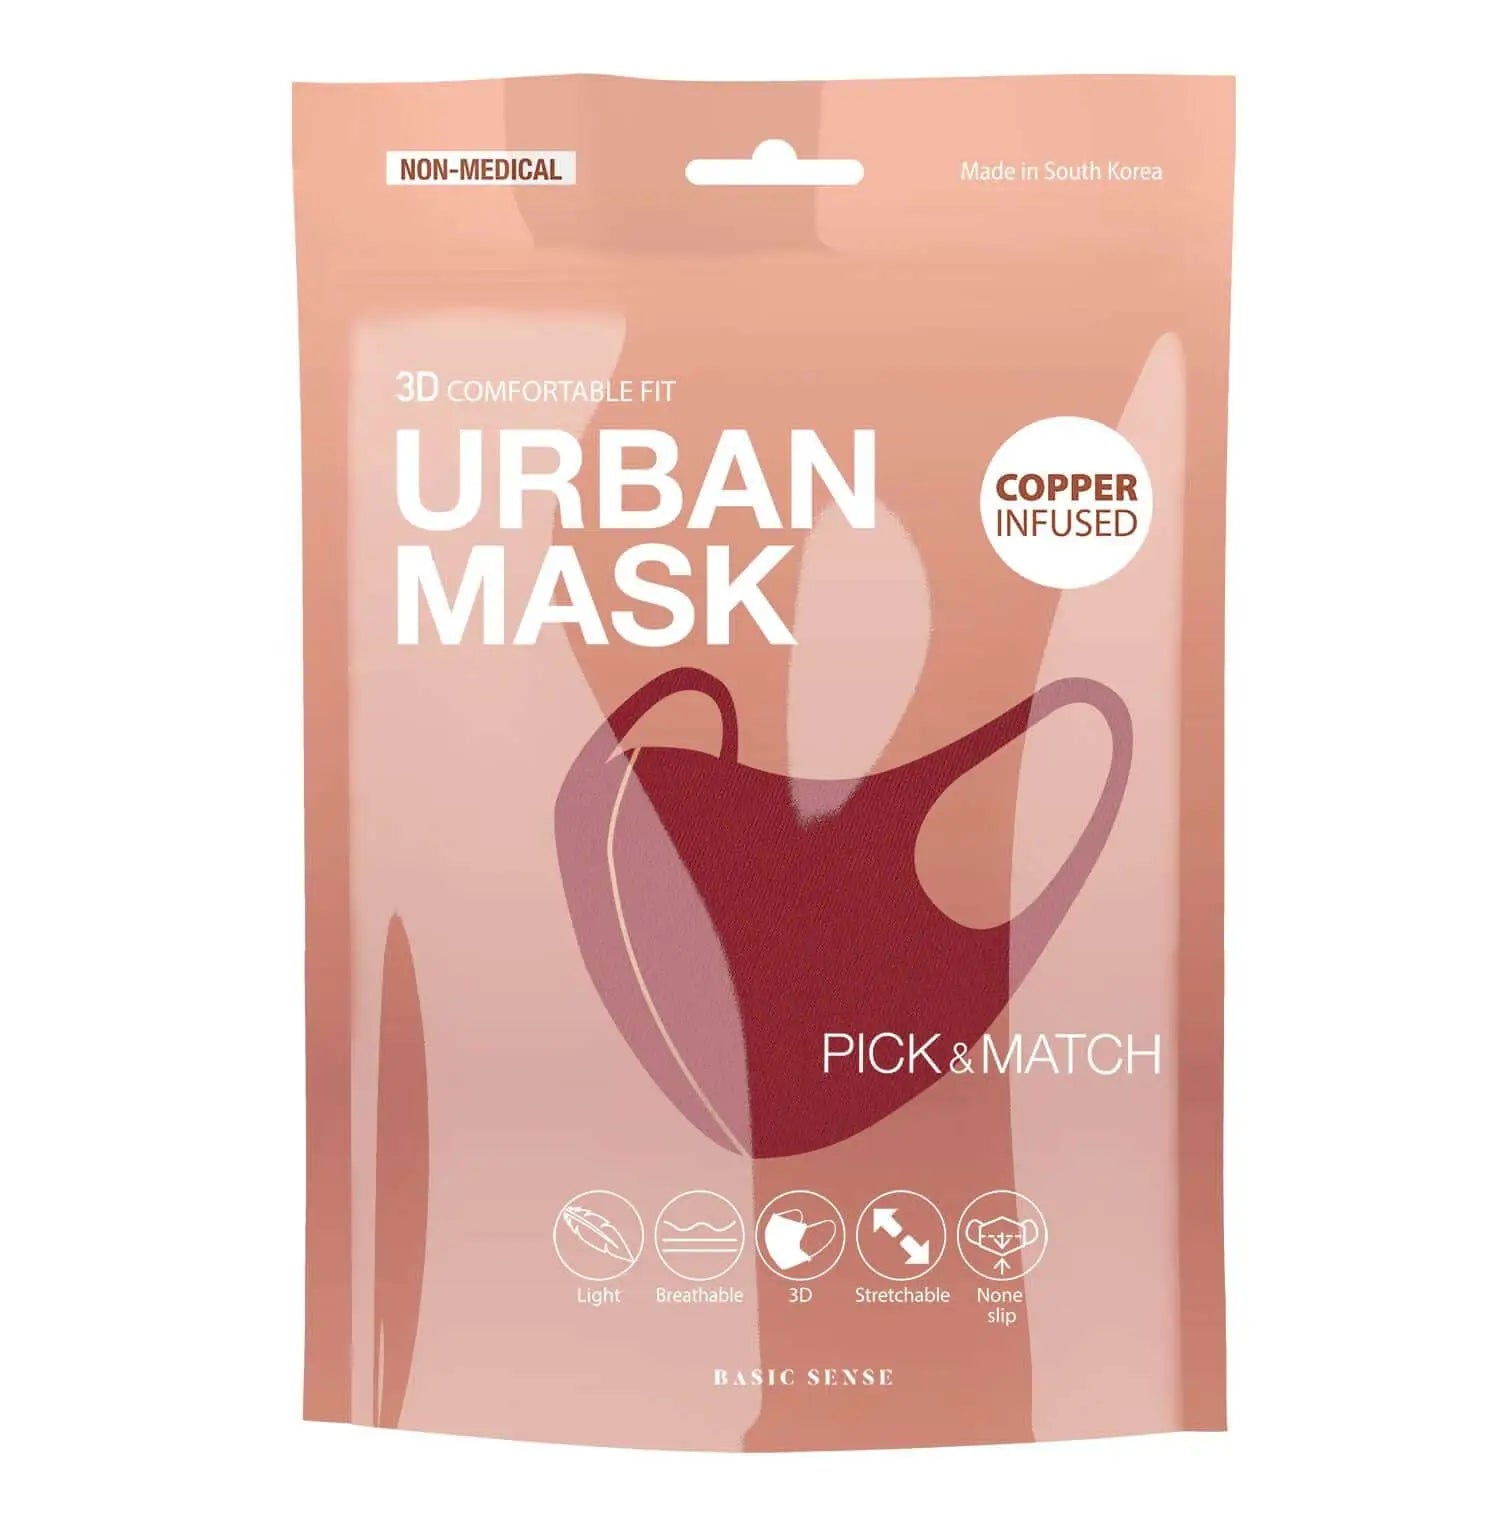 Urban mask in pink match for stylish protection, copper infused.